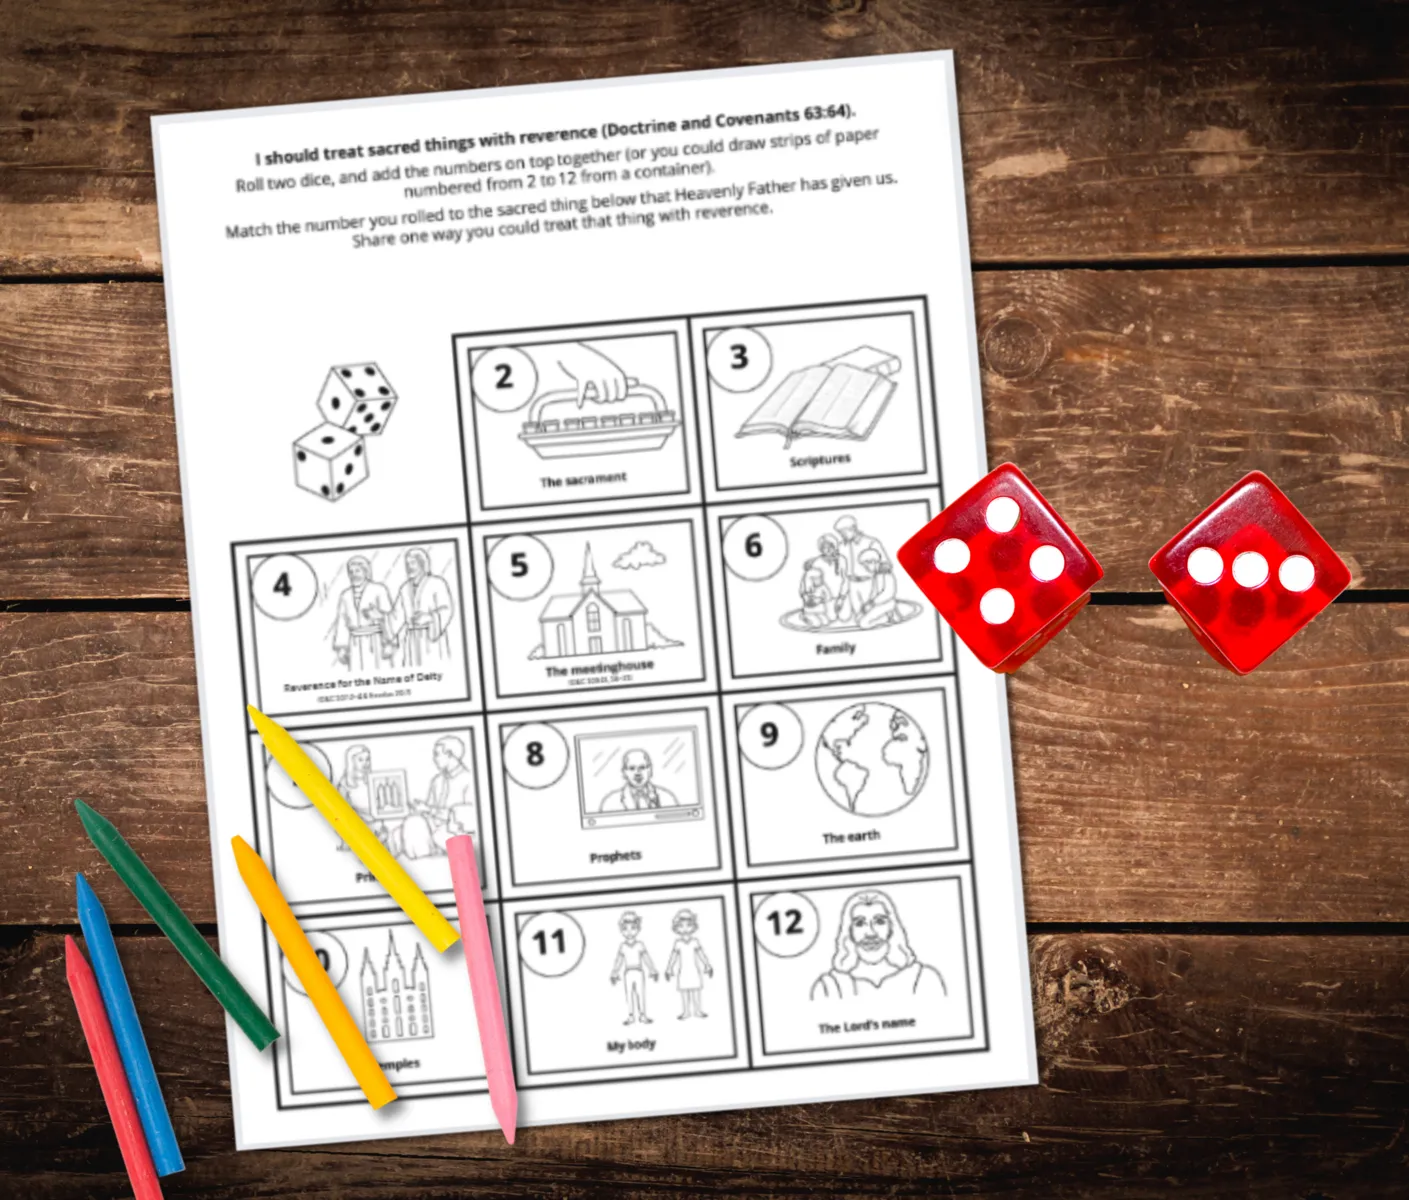 treat sacred things with reverence kids game printable freebie